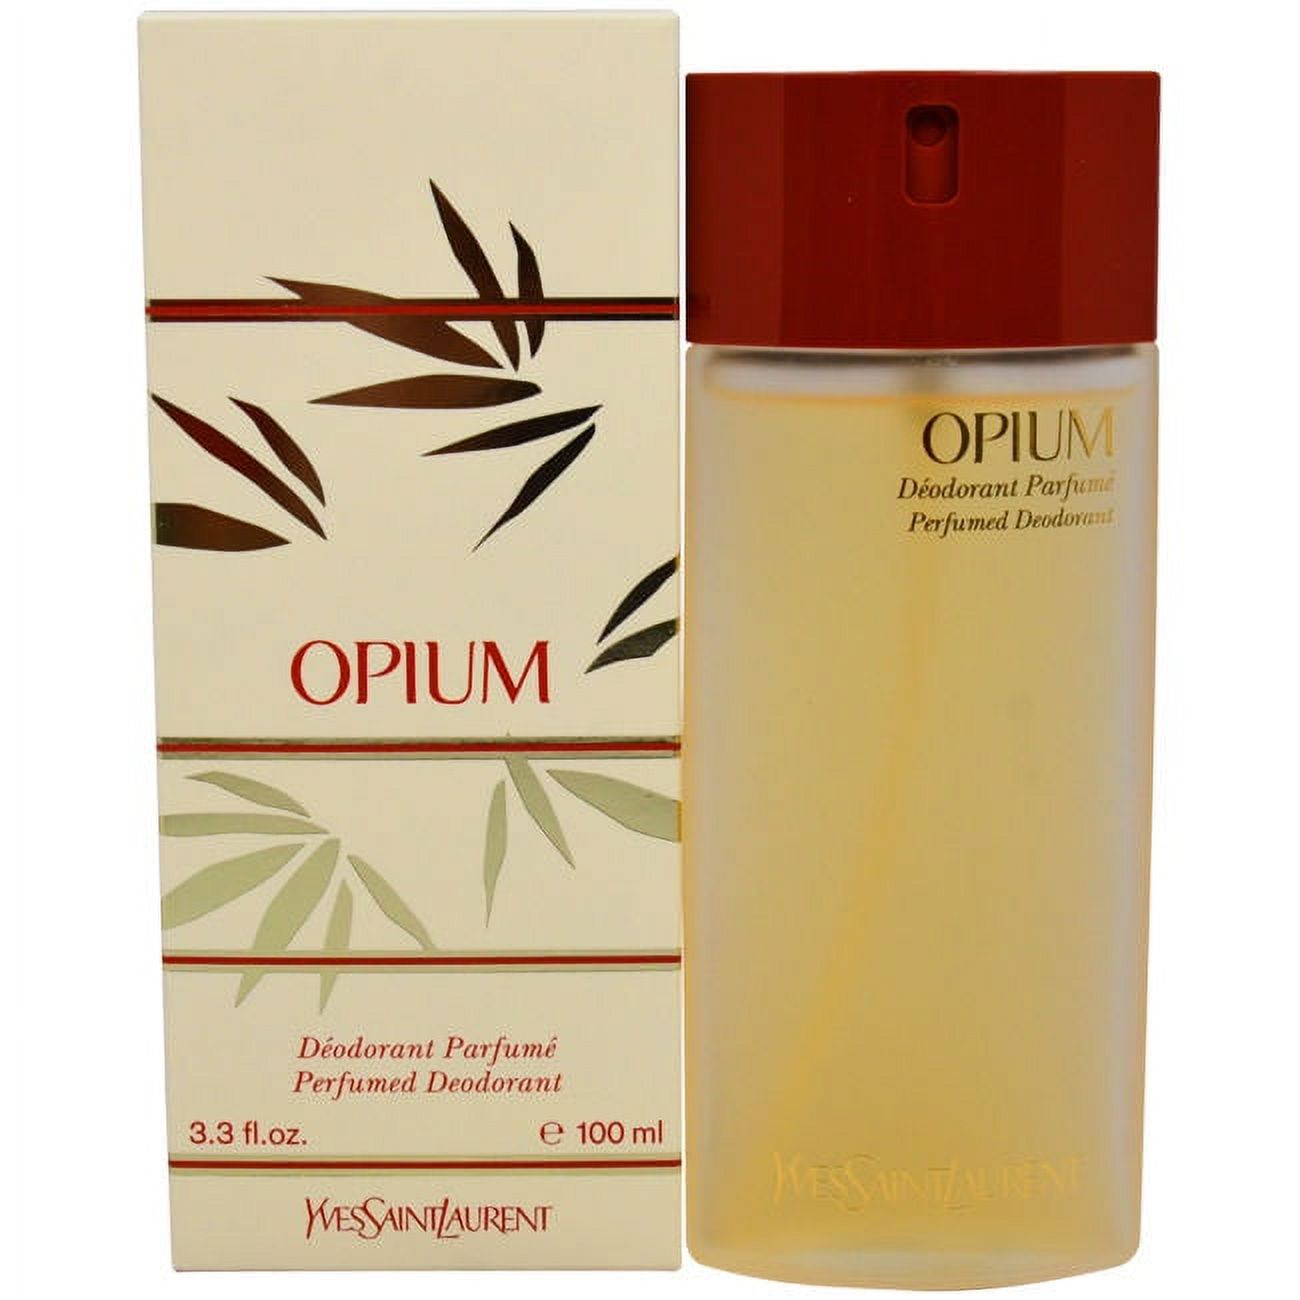 Opium For Women By Ysl 3.3 oz Perfumed Deo. - image 3 of 3